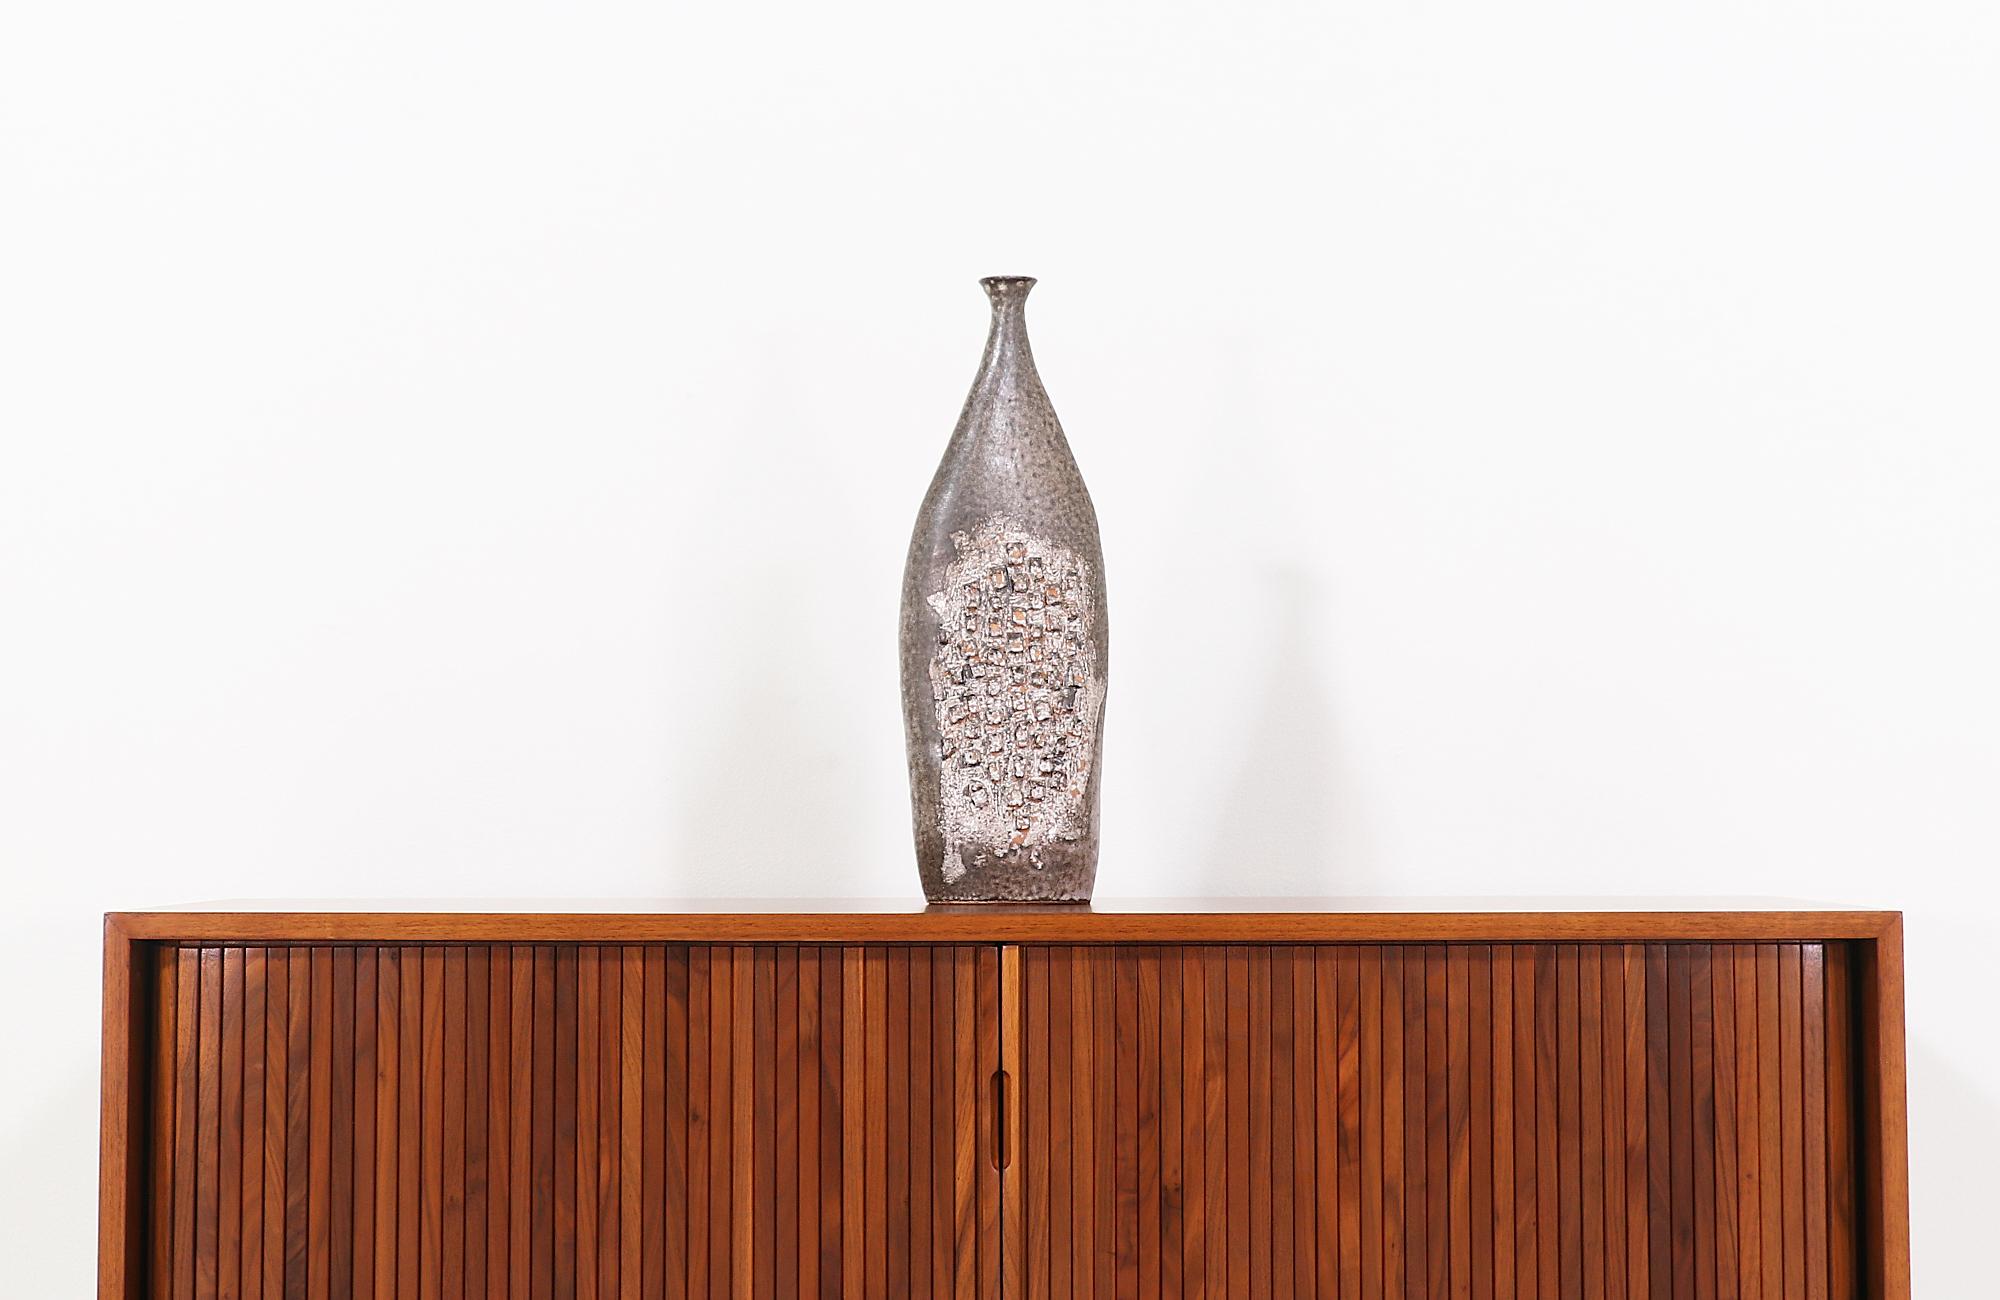 Unique Mid-Century Modern ceramic vase designed and manufactured in the United States in 1958. This biomorphic vase features a tall glazed ceramic body in earthy tones with a rich combination of textures and cubist detailing in the front and back.